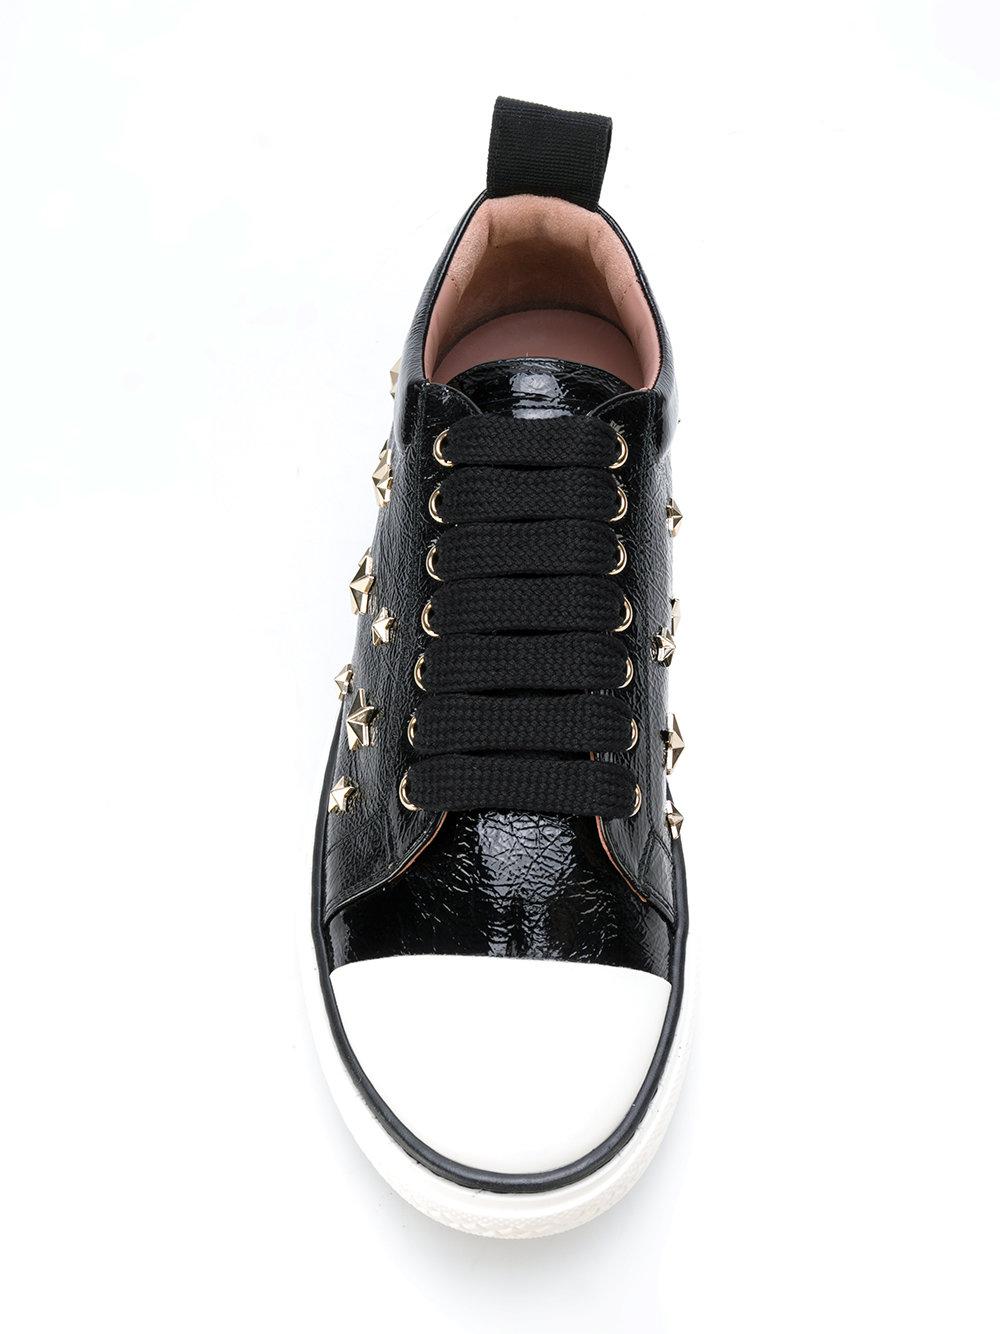 RED Valentino Leather Star Sneaker in Lyst